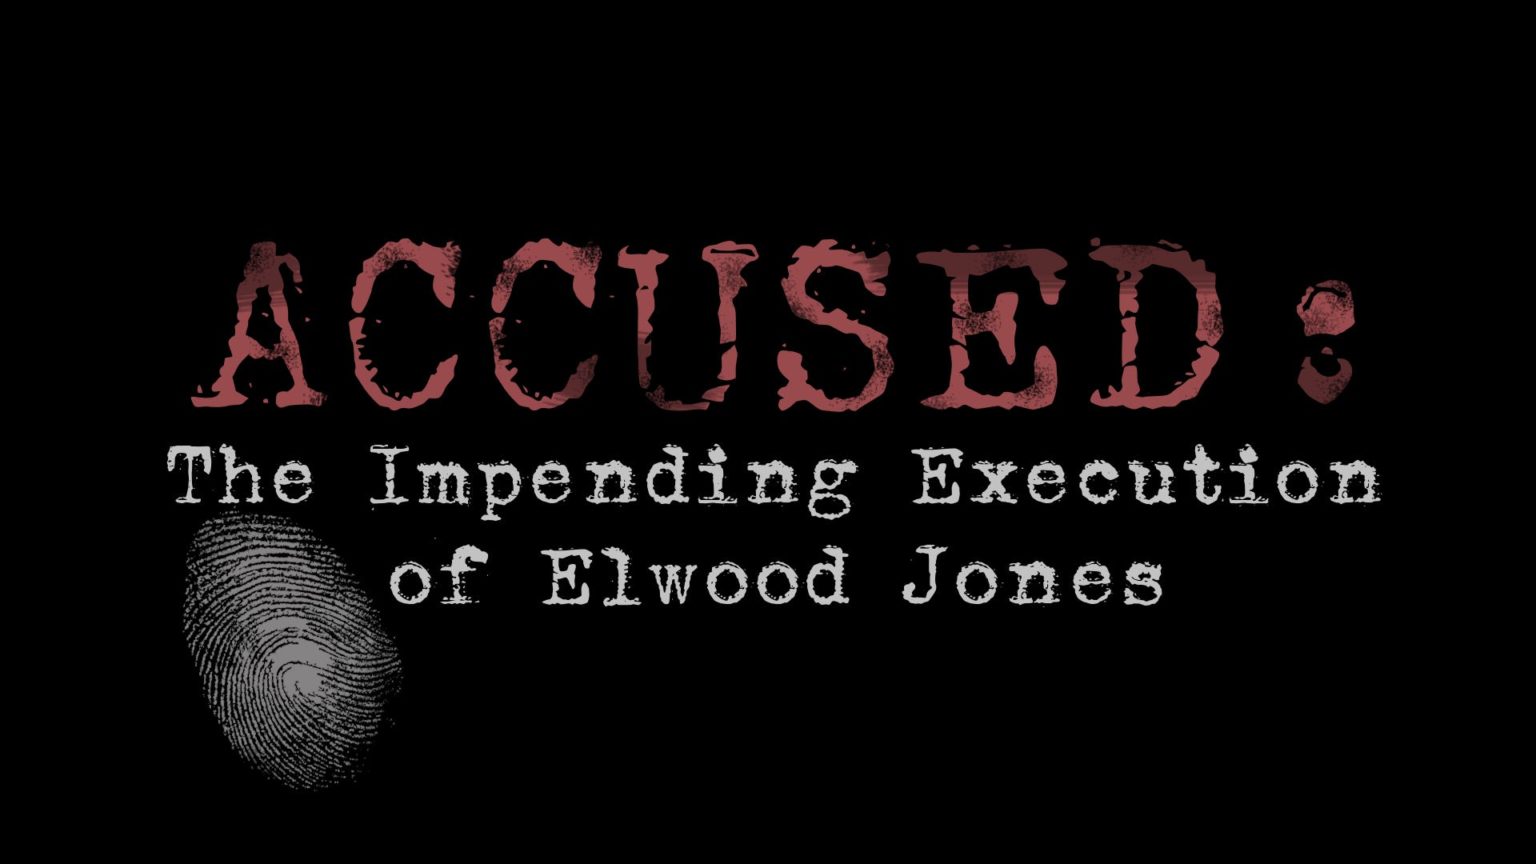 Accused Season 4: ‘The Impending Execution of Elwood Jones’ podcast is now available for USA TODAY subscribers